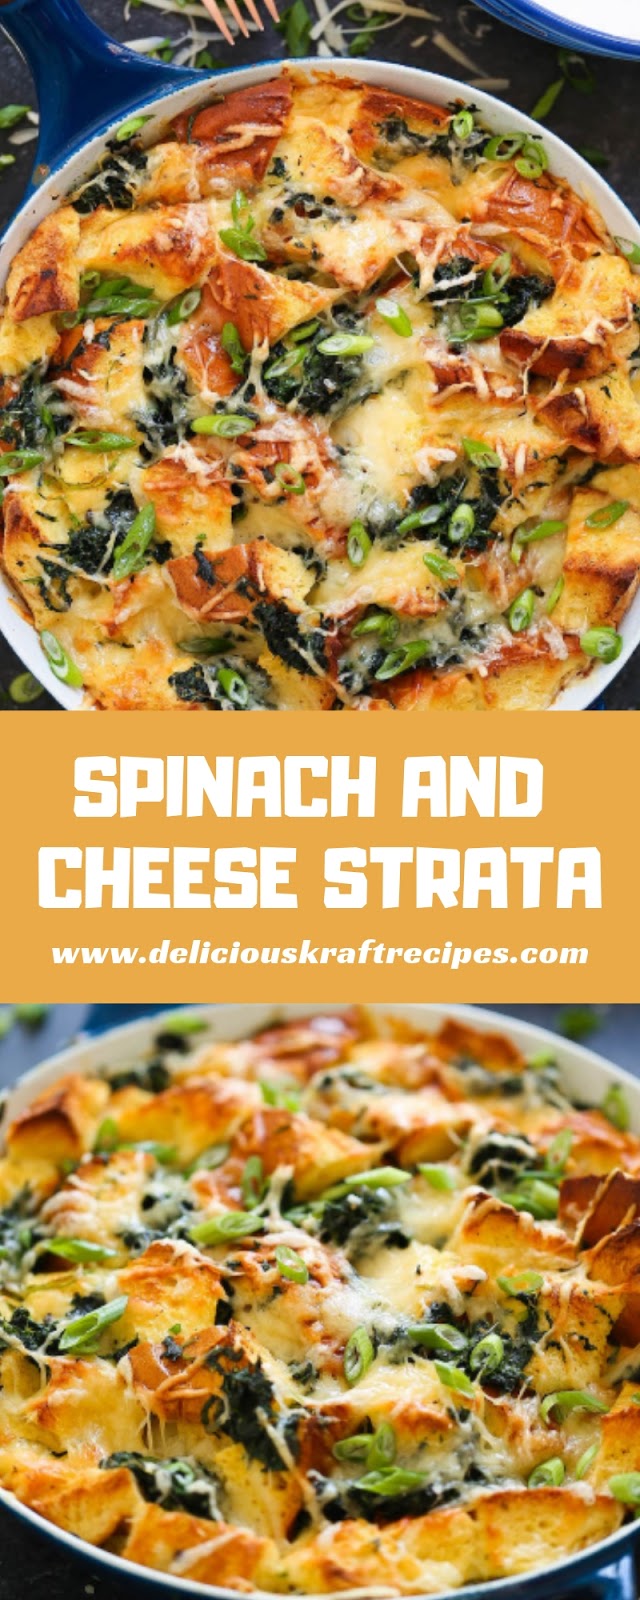 SPINACH AND CHEESE STRATA